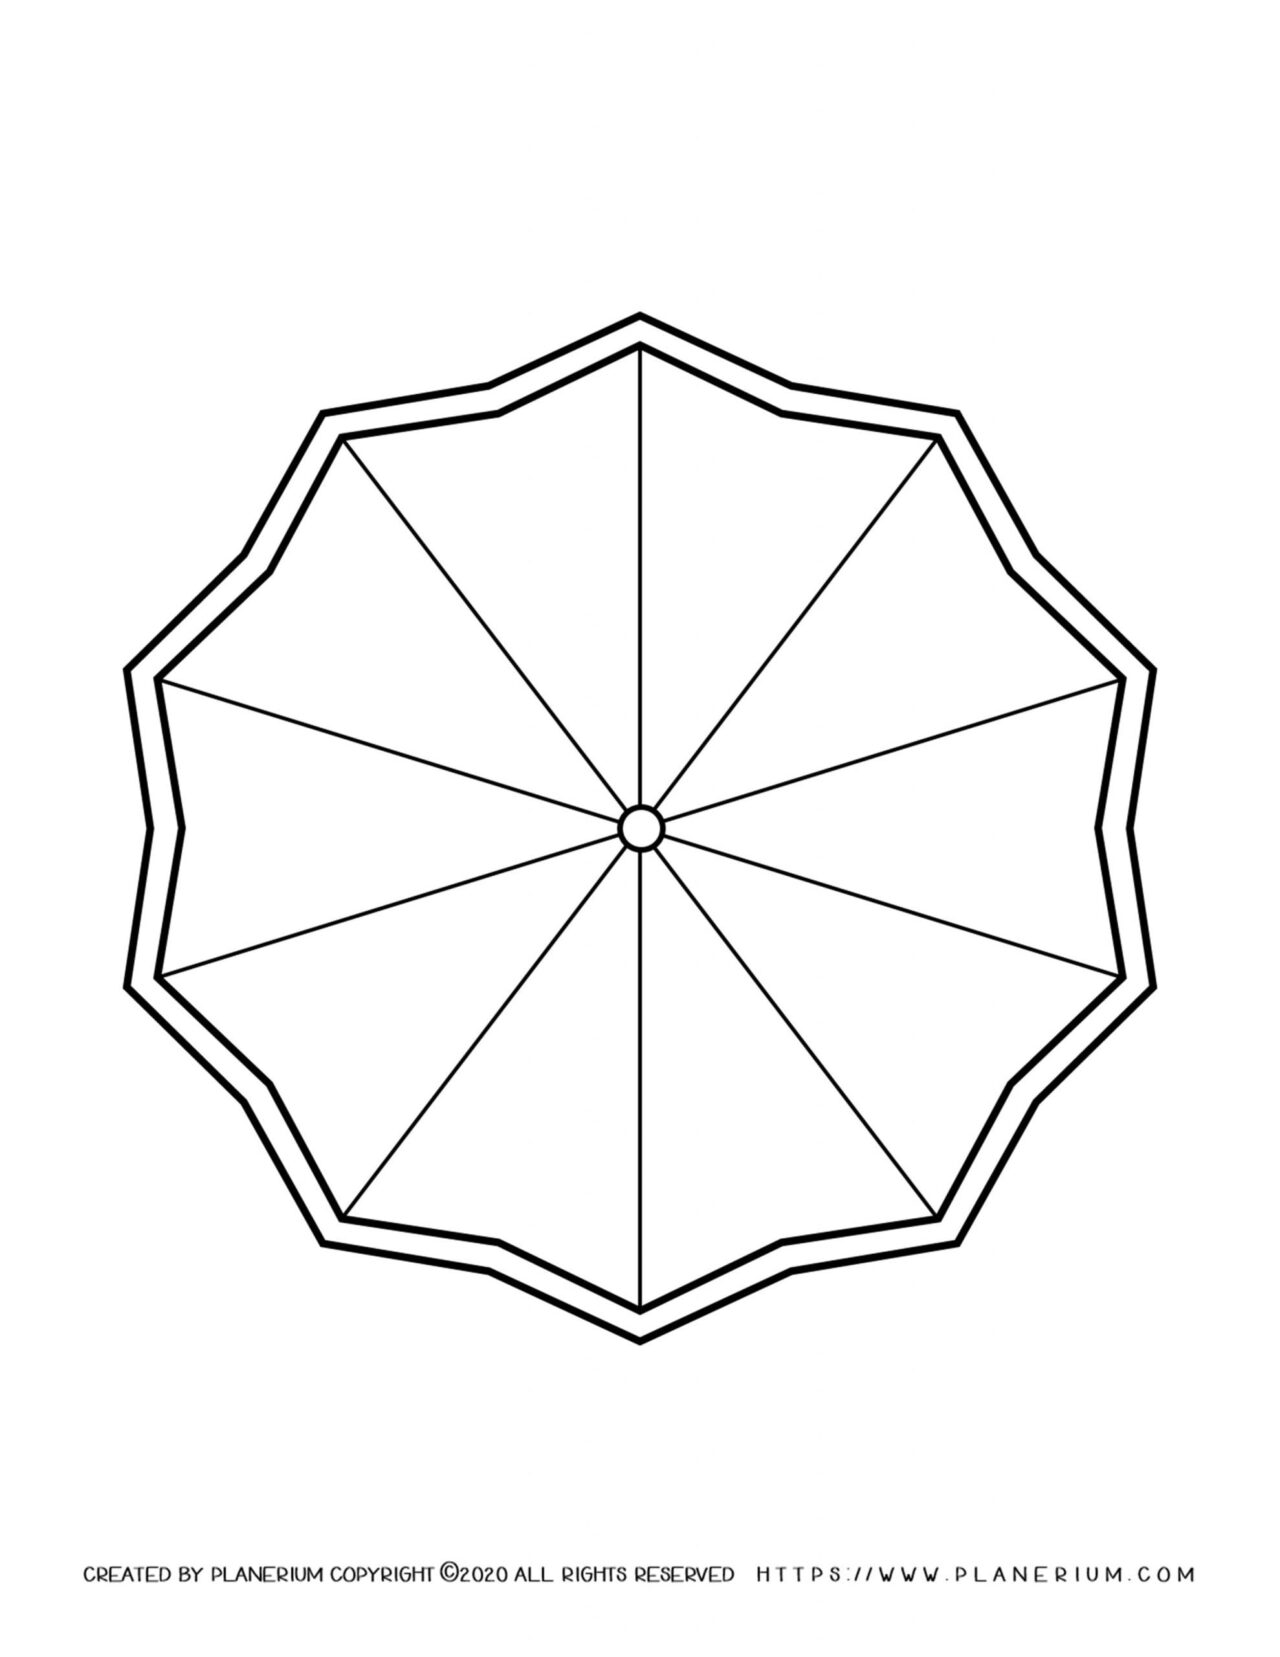 Spring coloring page with a decagon shaped umbrella